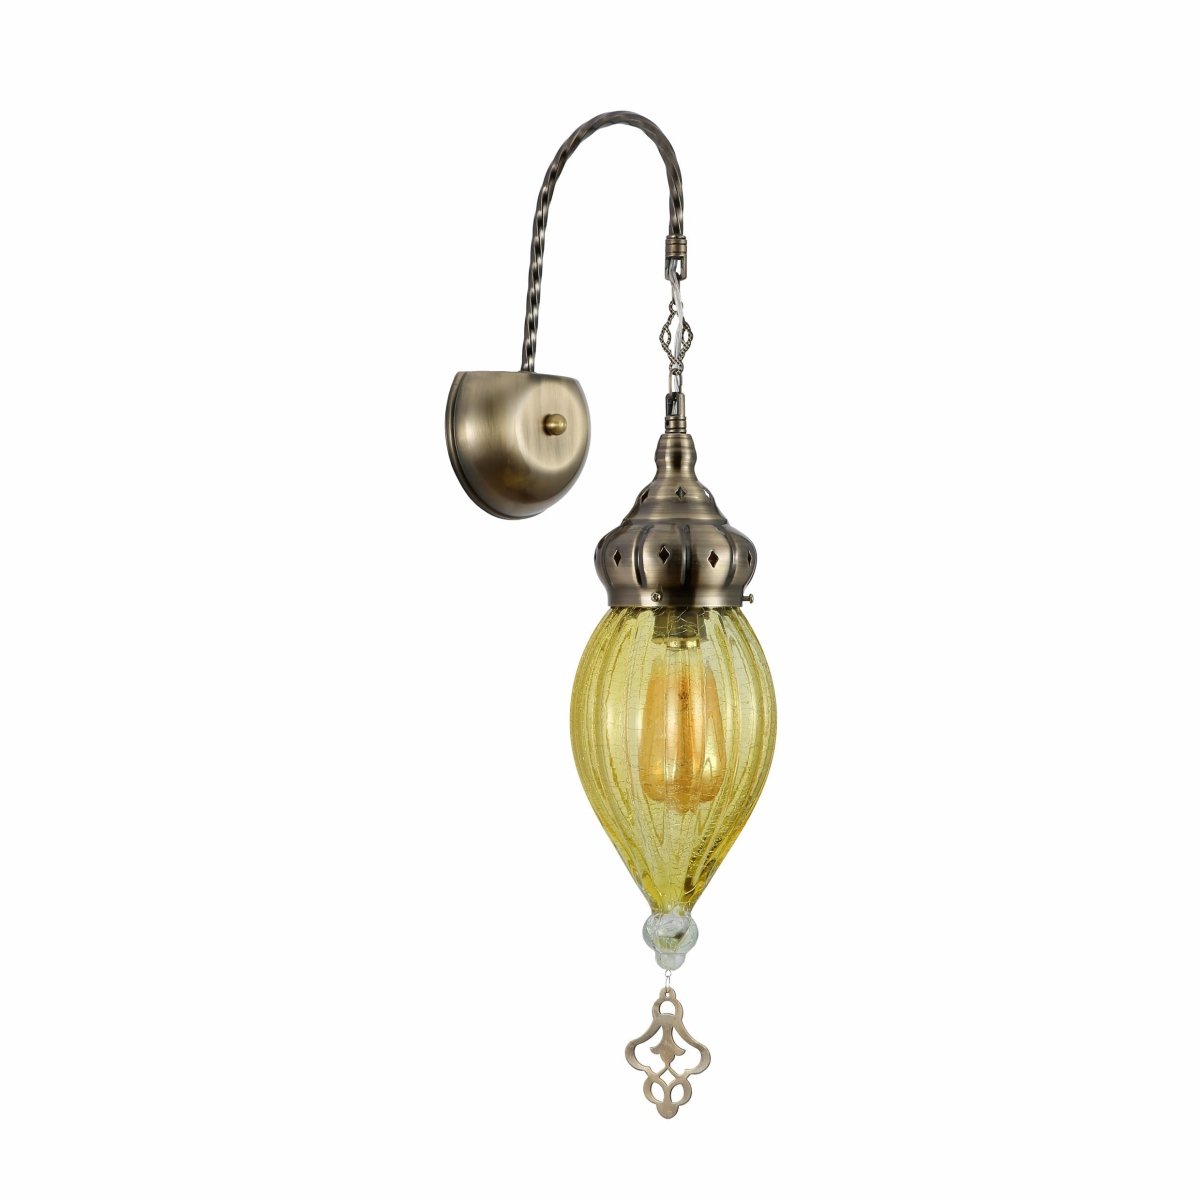 Main image of Yellow Glass Antique Bronze Metal Body Moroccan Style Wall Light with E27 Fitting | TEKLED 151-194582